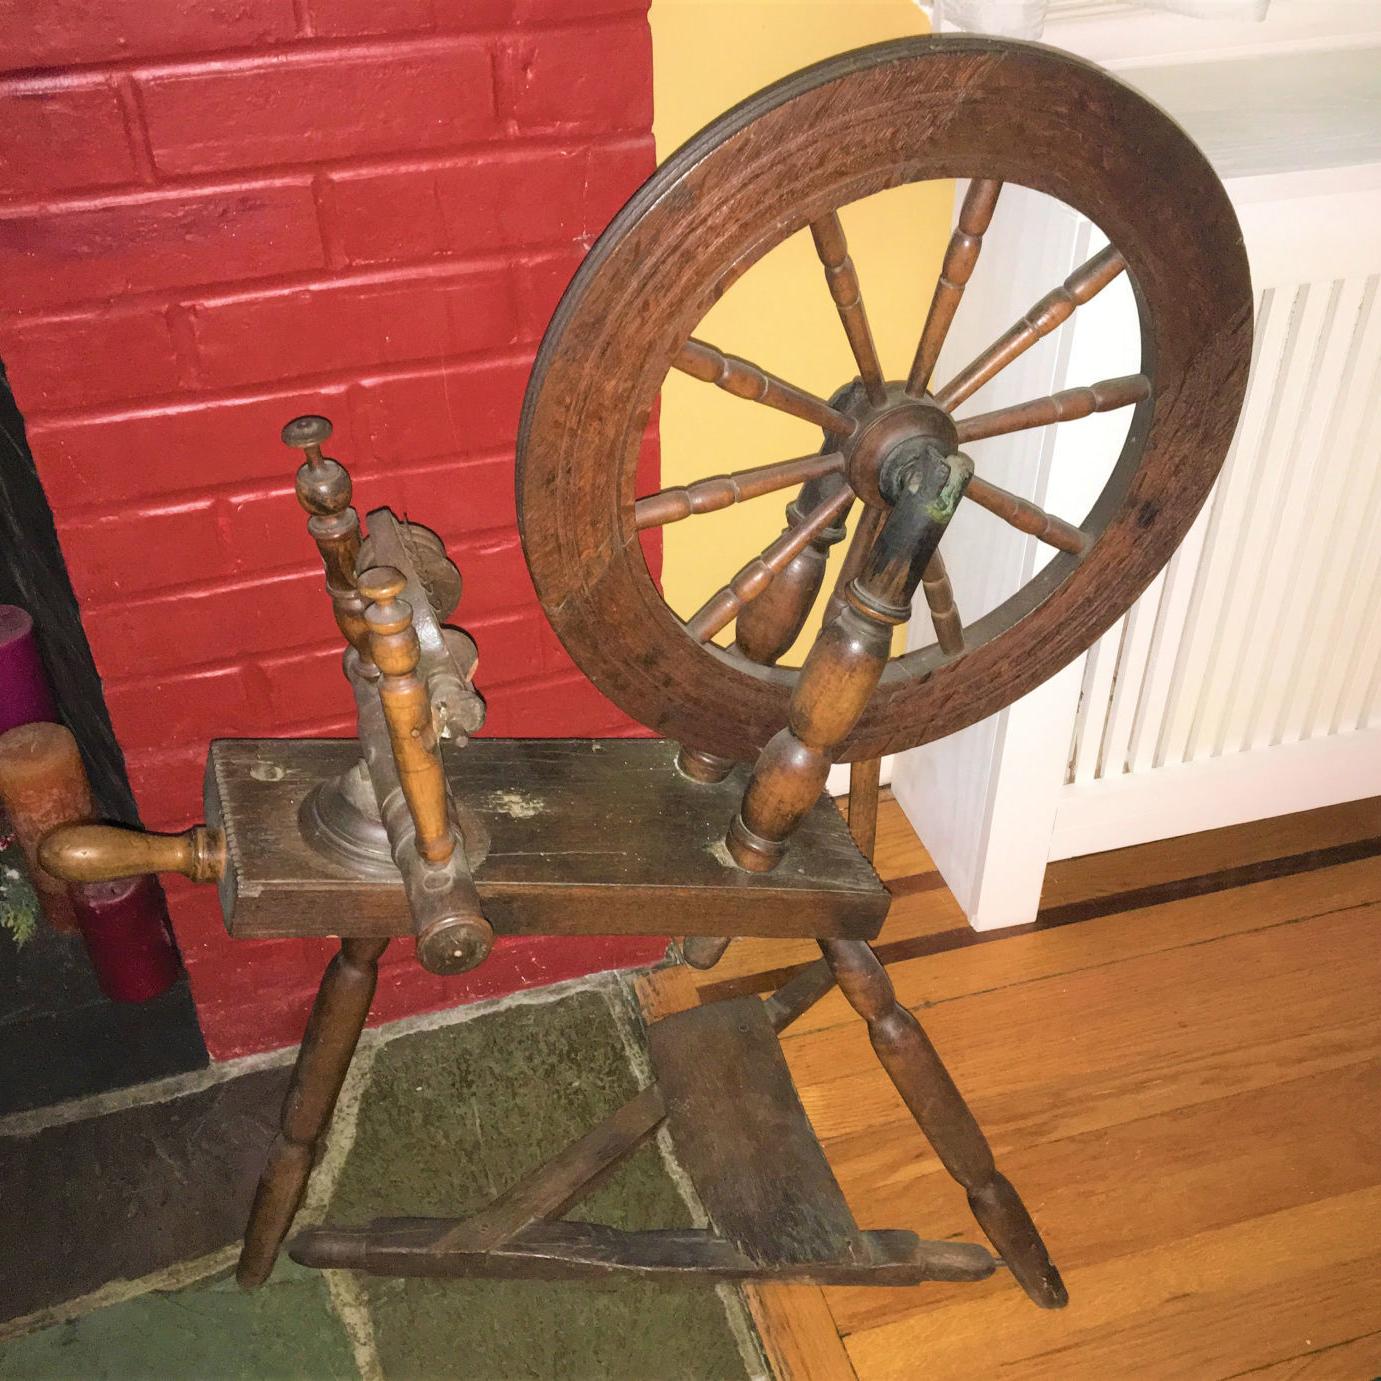 Treasures In Your Attic: Saxony spinning wheels fairly common, Lifestyles